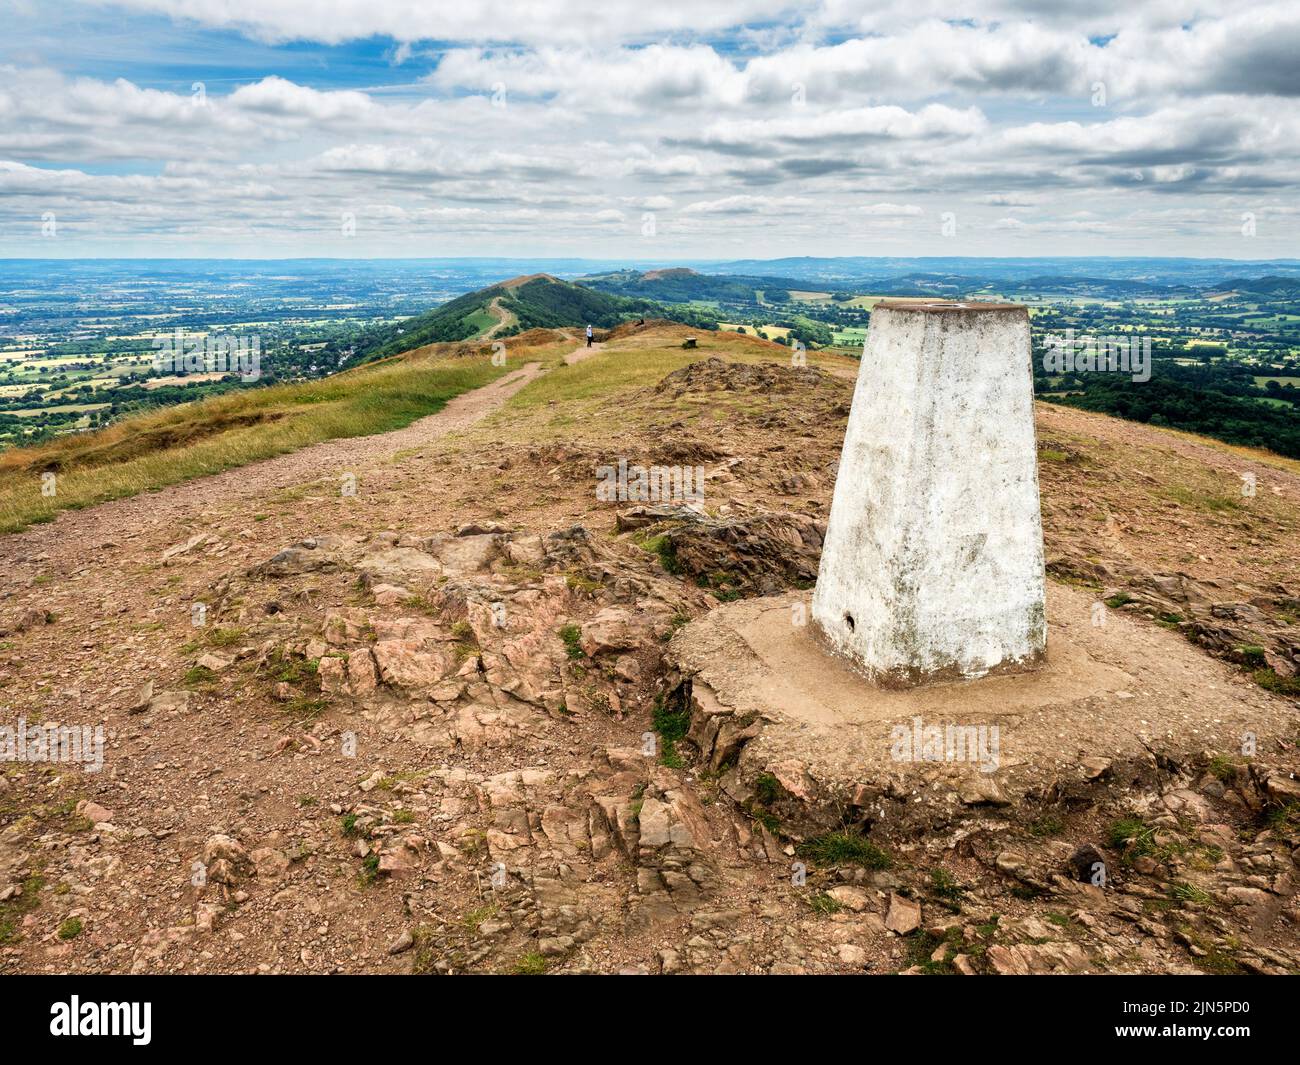 Trig point at the summit of Worcestershire Beacon in the Malvern Hills AONB England Stock Photo